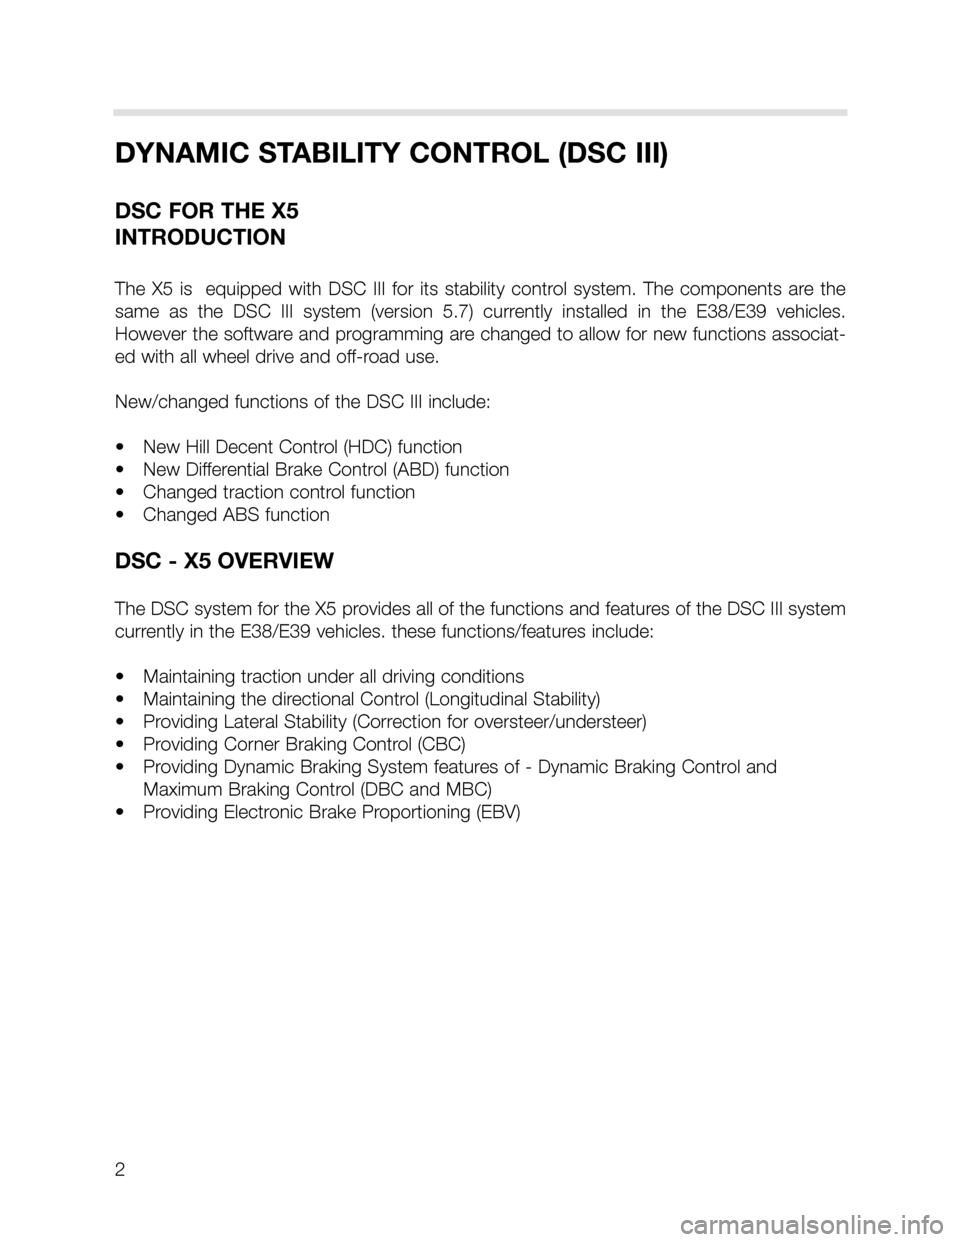 BMW X5 2006 E53 DSC System Workshop Manual 2
DYNAMIC STABILITY CONTROL (DSC III)
DSC FOR THE X5
INTRODUCTION
The  X5  is    equipped  with  DSC  III  for  its  stability  control  system.  The  components  are  the
same  as  the  DSC  III  sys